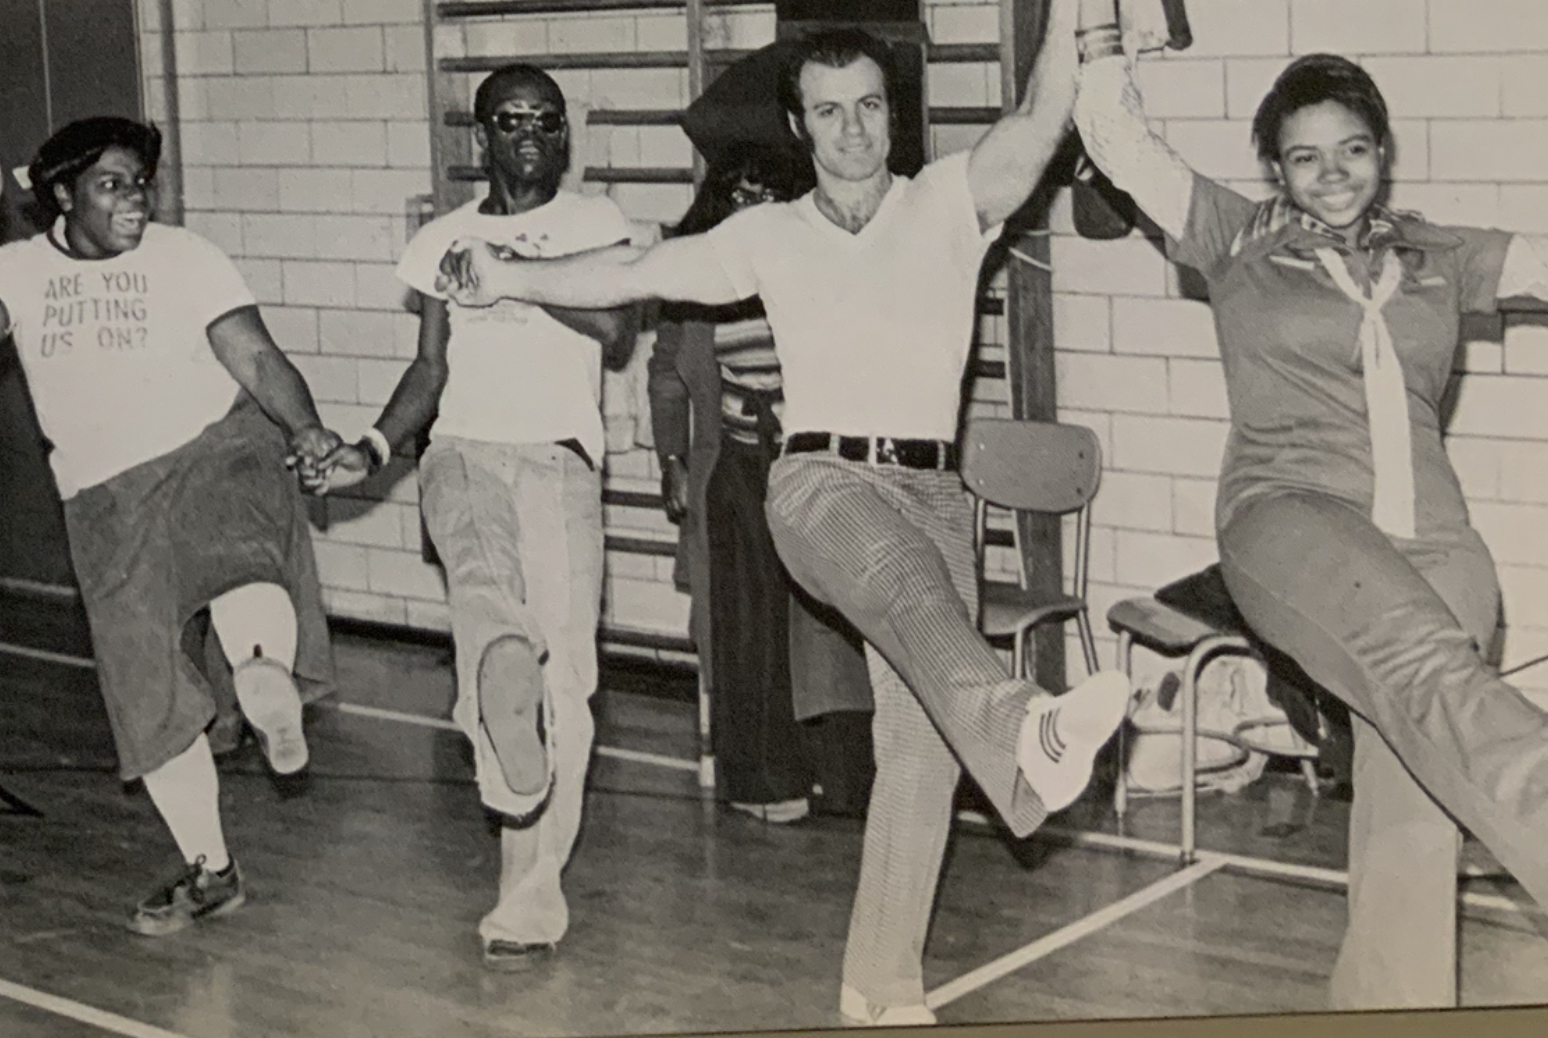 spalding students in the 70s, holding hands and dancing